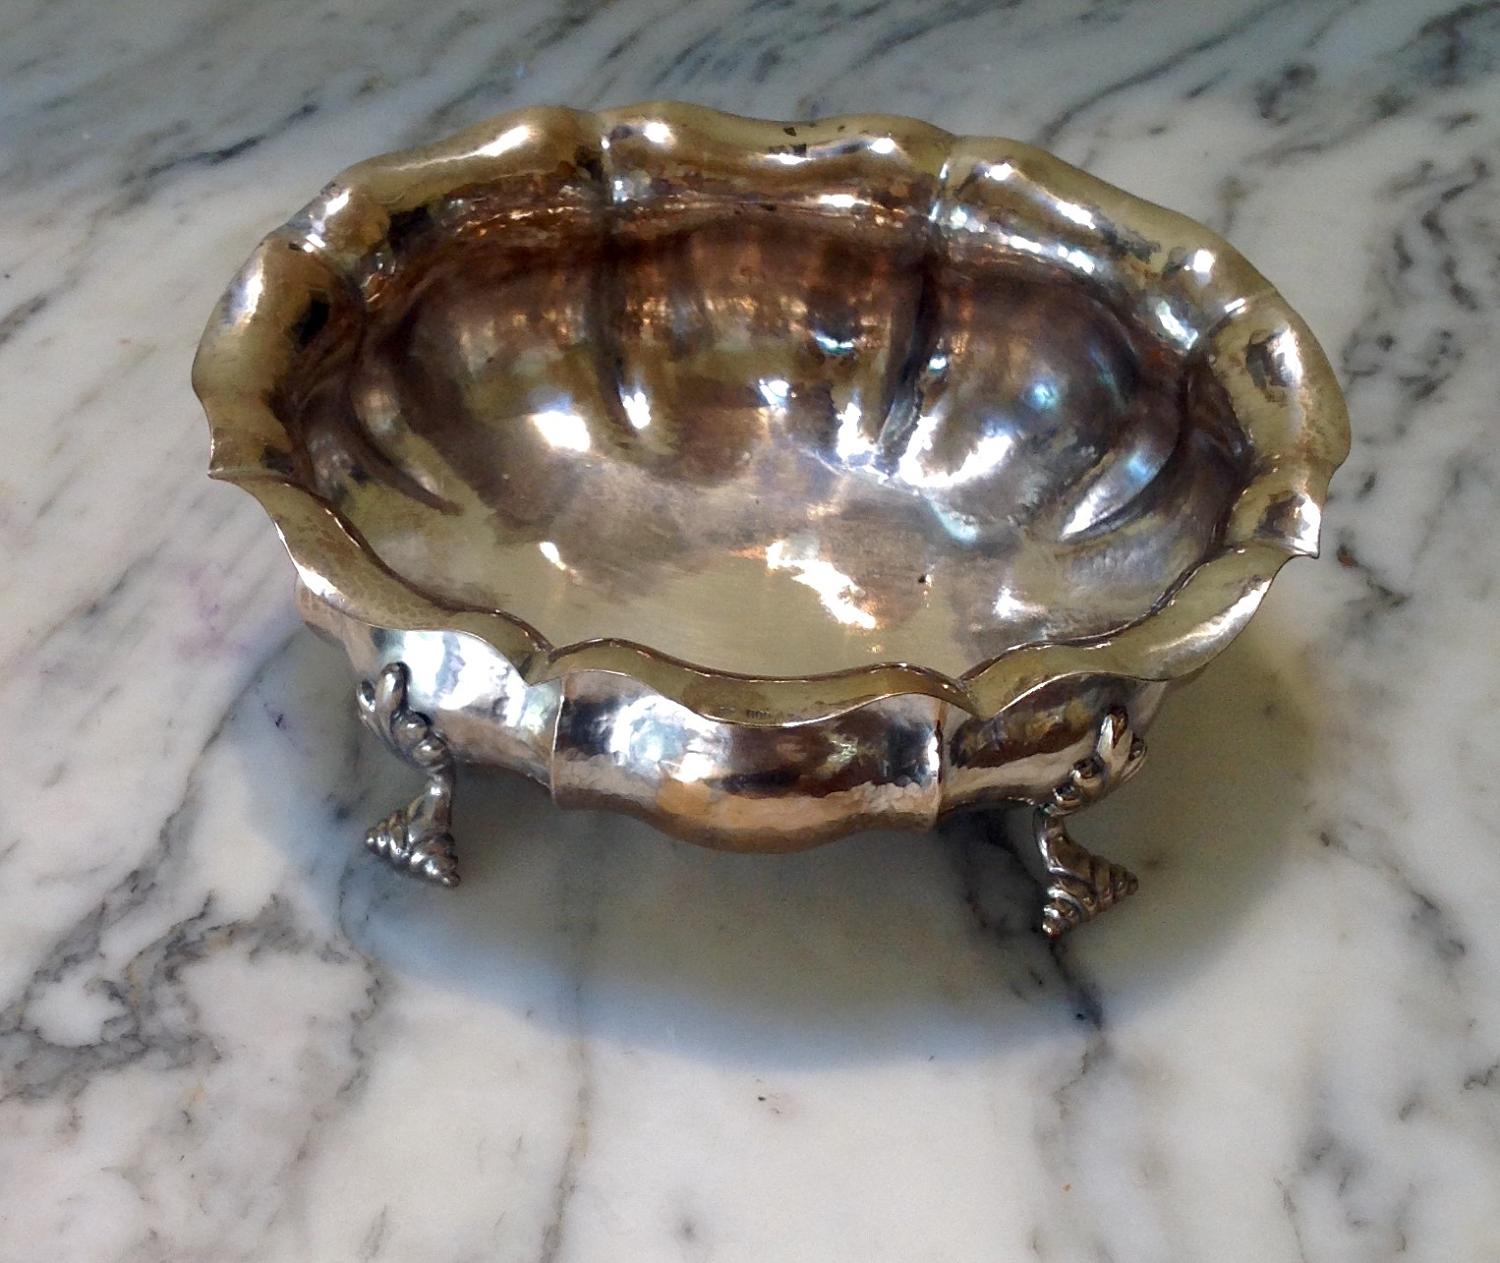 Silver Oval Bowl